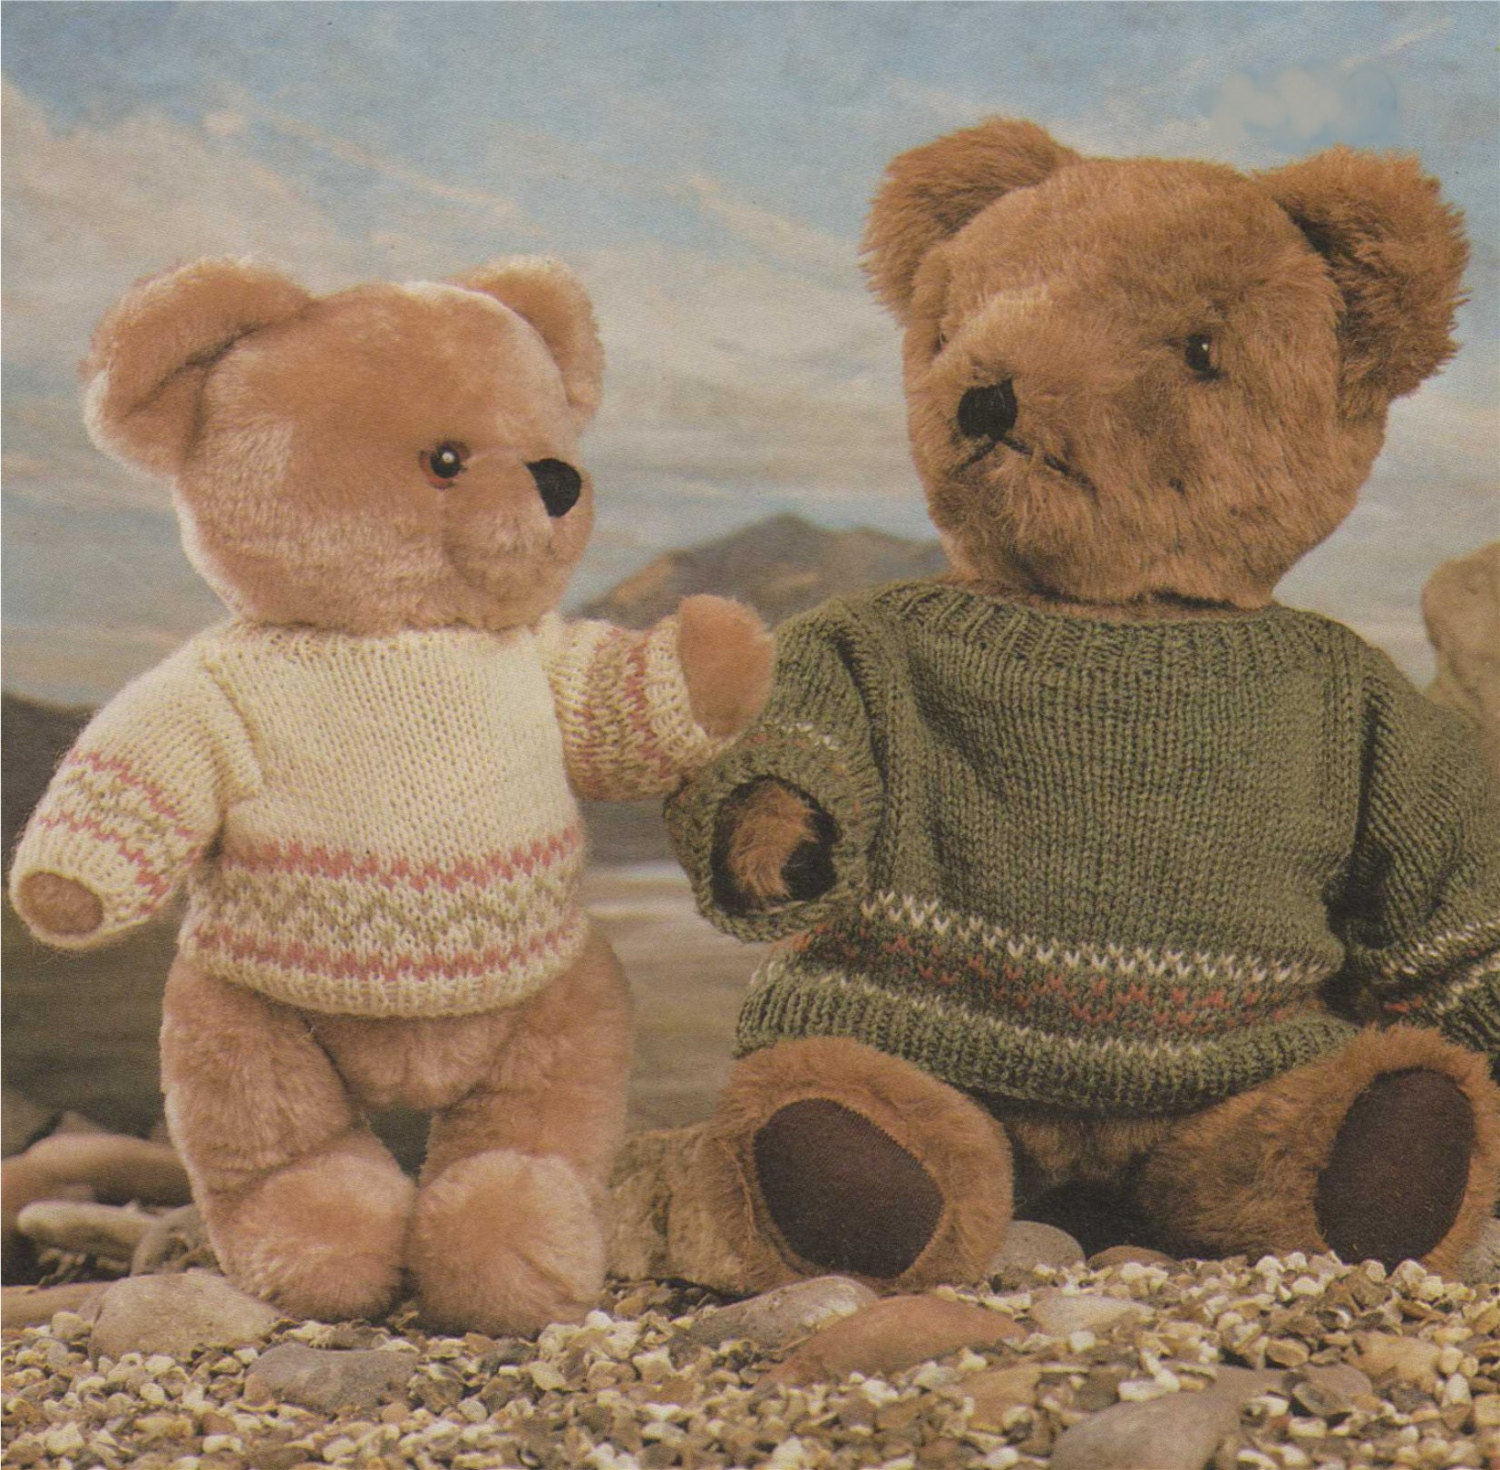 Knitting Patterns For Teddy Bear Clothes Teddy Bear Clothes Knitting Pattern Pdf Fair Isle Sweater For 14 16